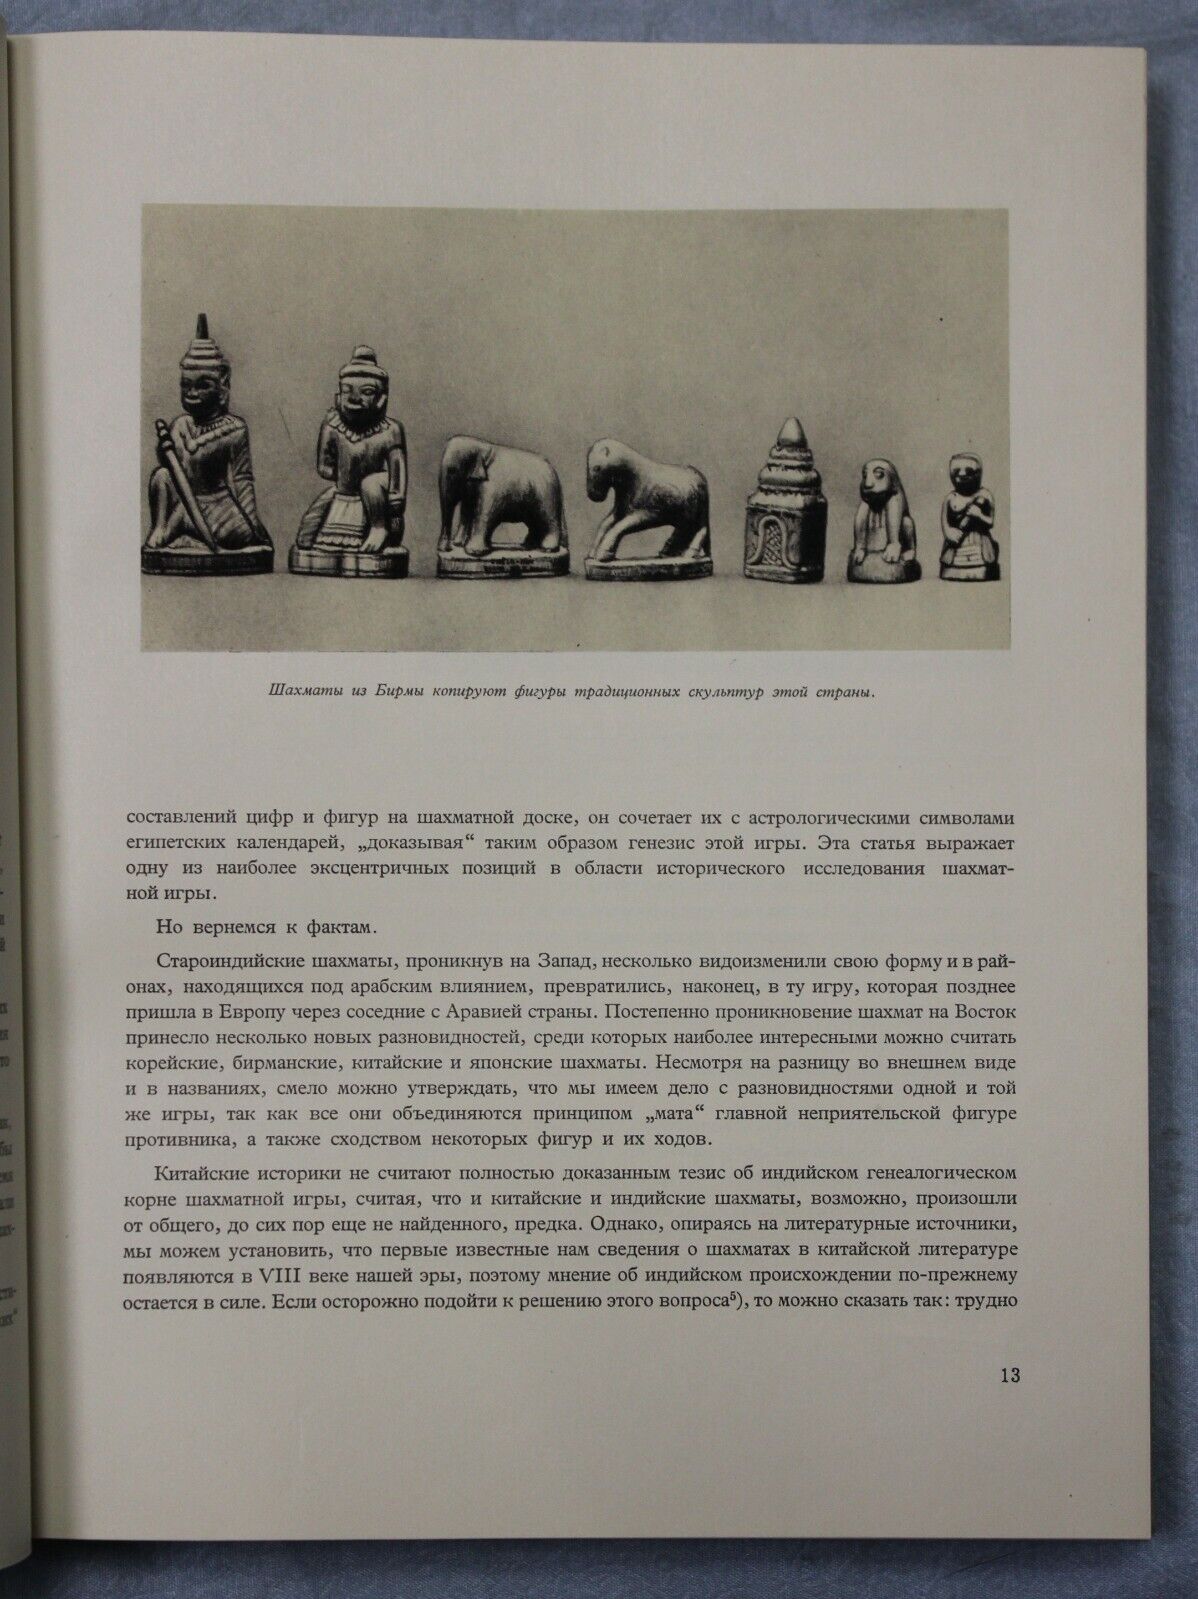 11133.Chess Book: Very Rare w illustrations Chess Through Centuries & Countries 1958